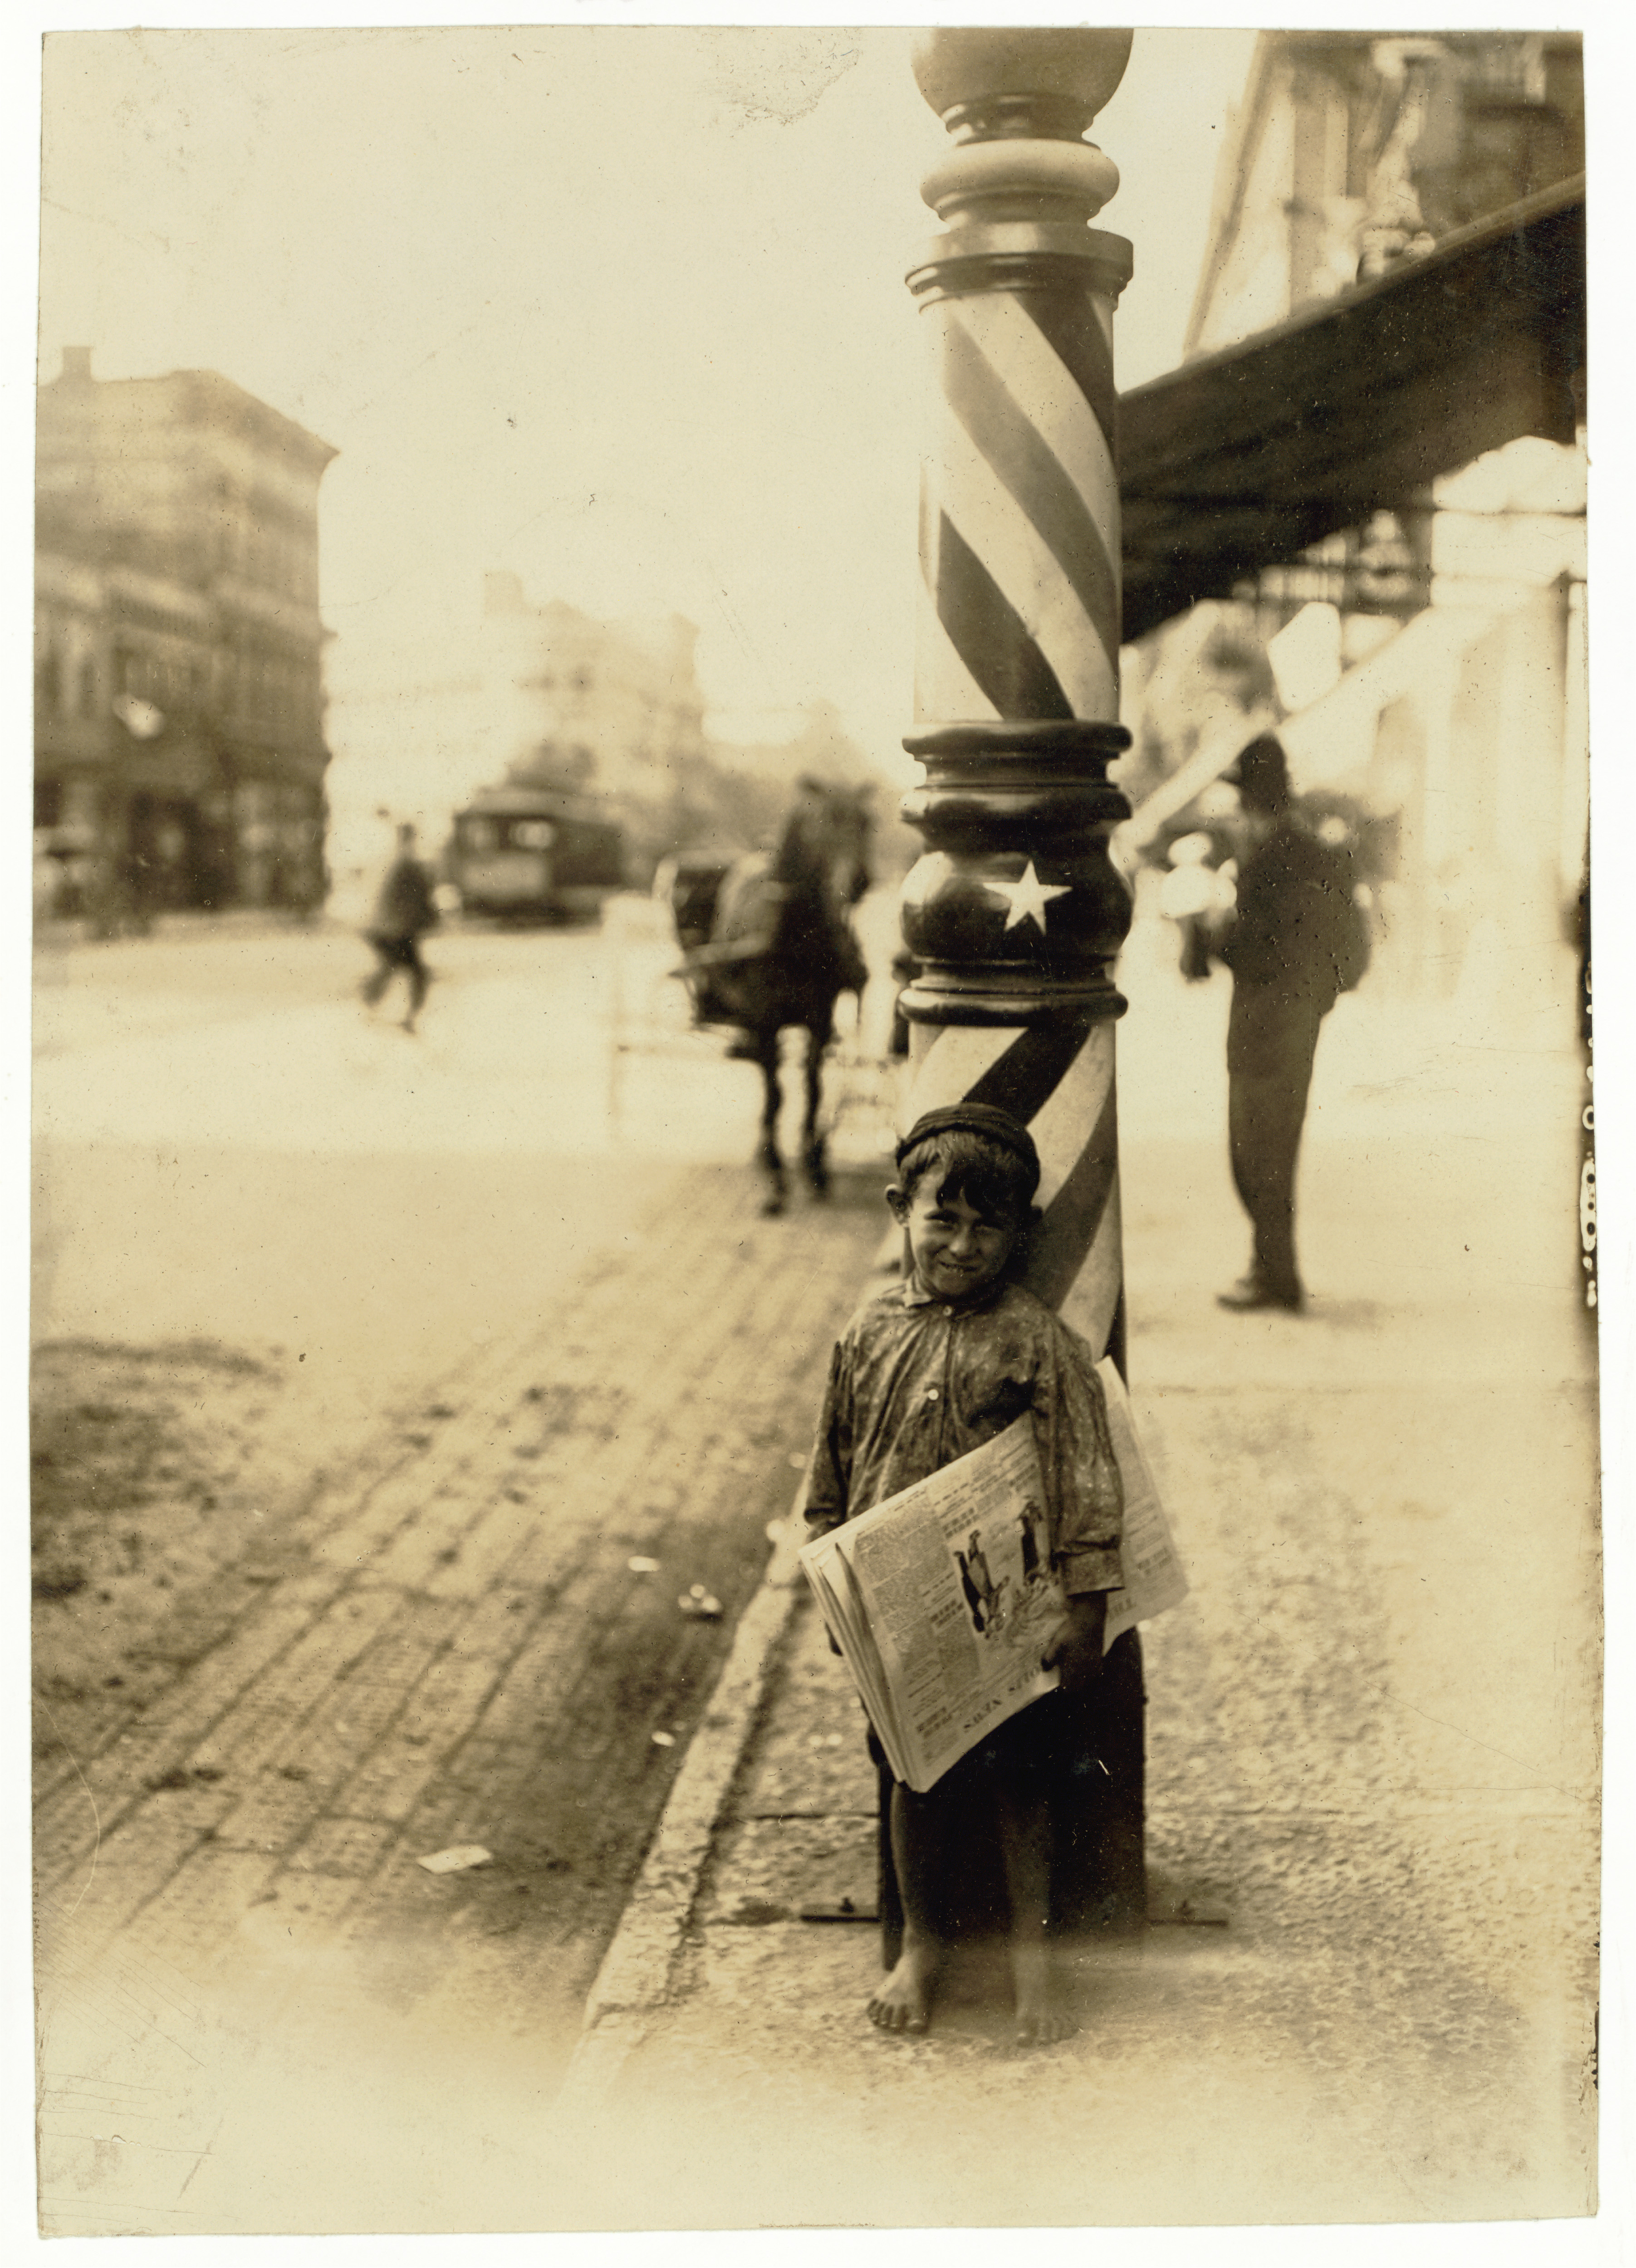 Lewis Hine, Indianapolis newsboy, 41 inches high, 1908